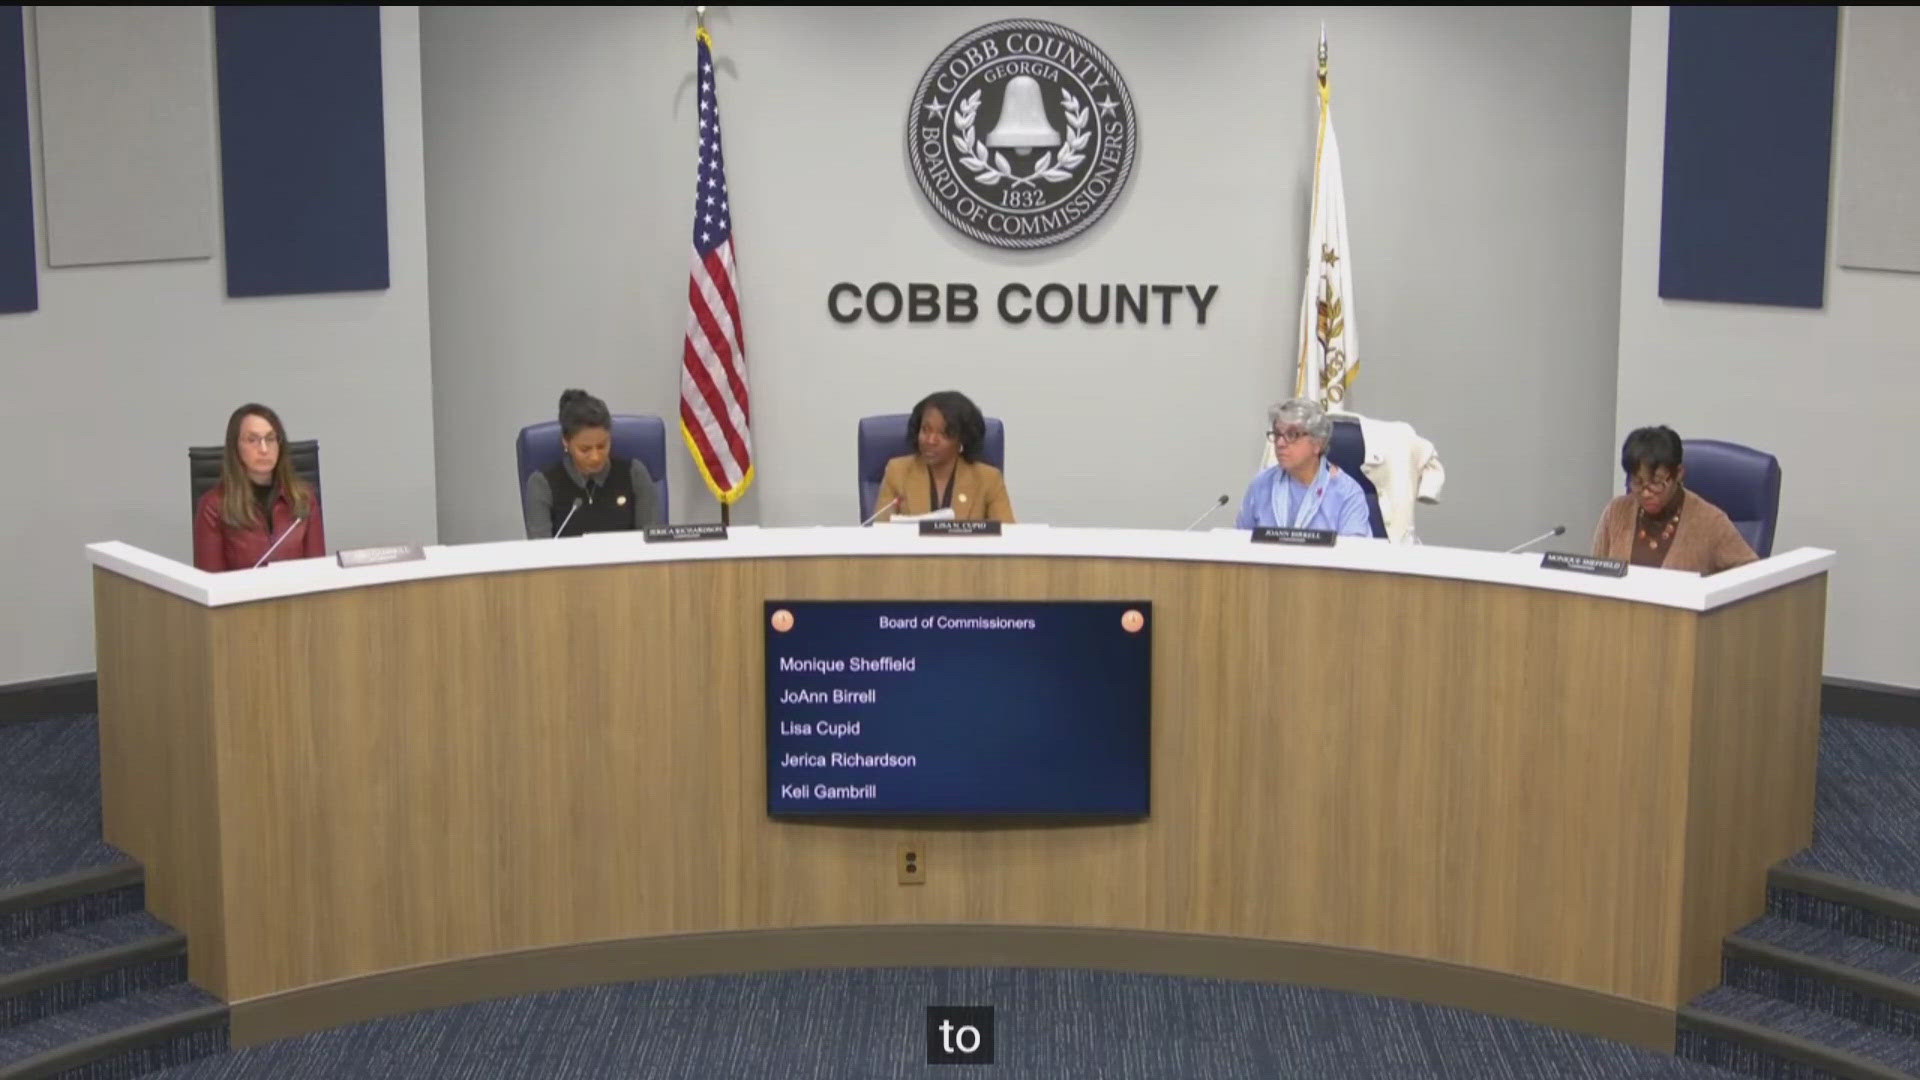 Cobb County will postpone a county commission election after a judge ruled the county illegally drew district lines for seats due to be on the ballot.